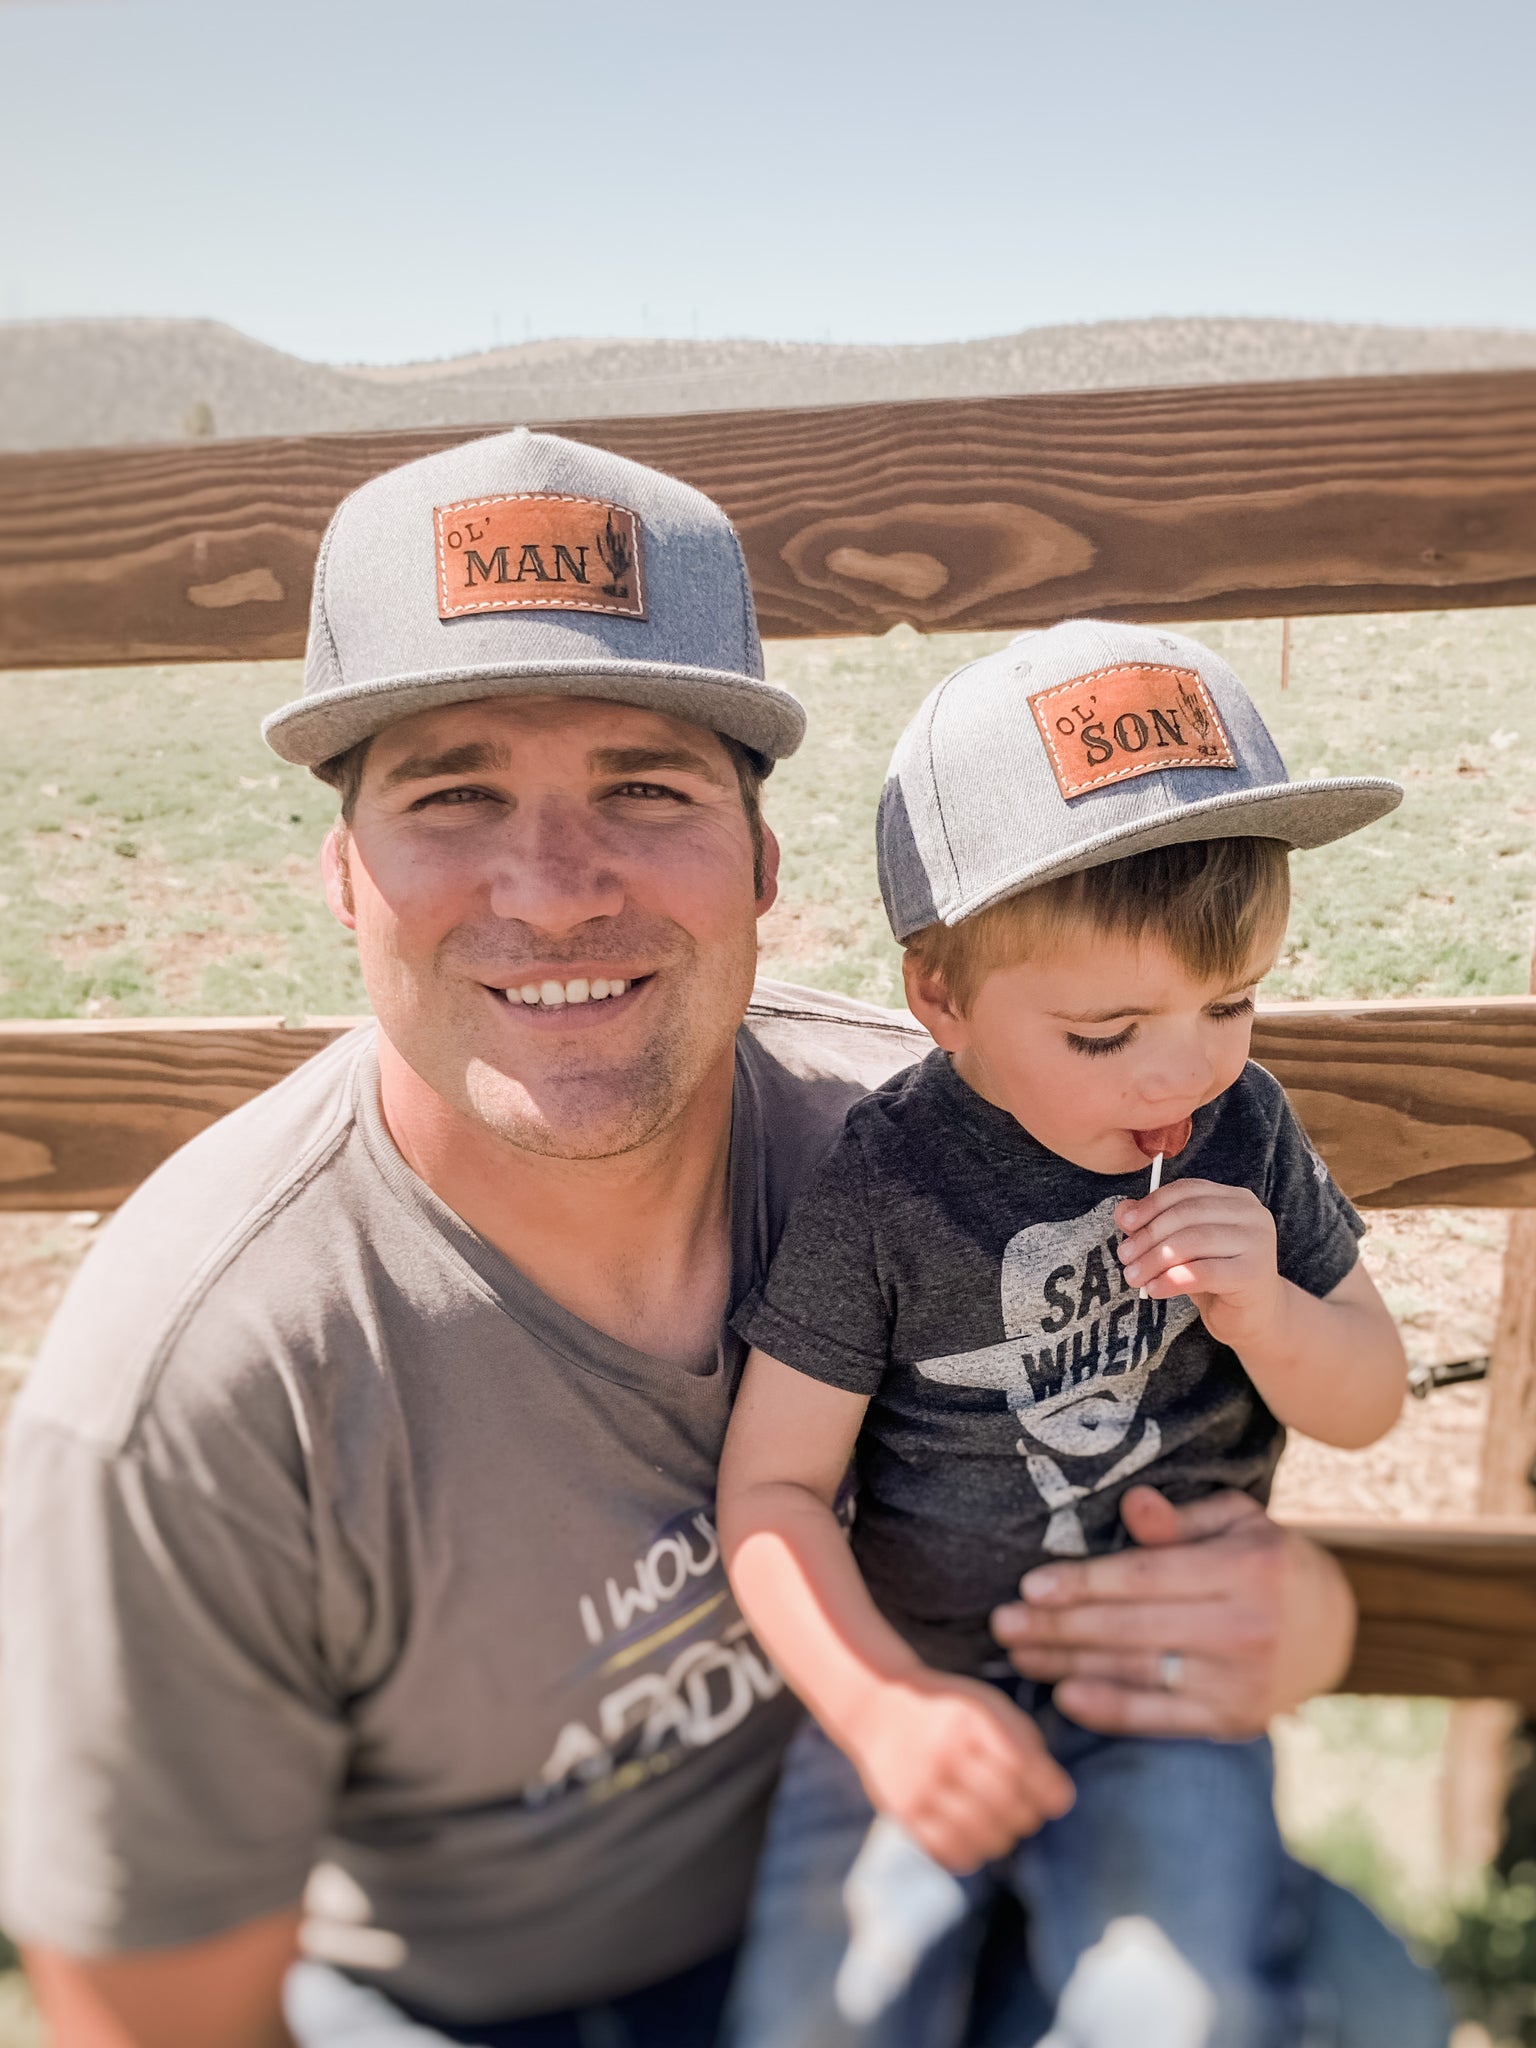 Ol’ Man + Ol’ Son Set of 2 Dad and Son Matching Snapback Hats Dad + Youth Gray